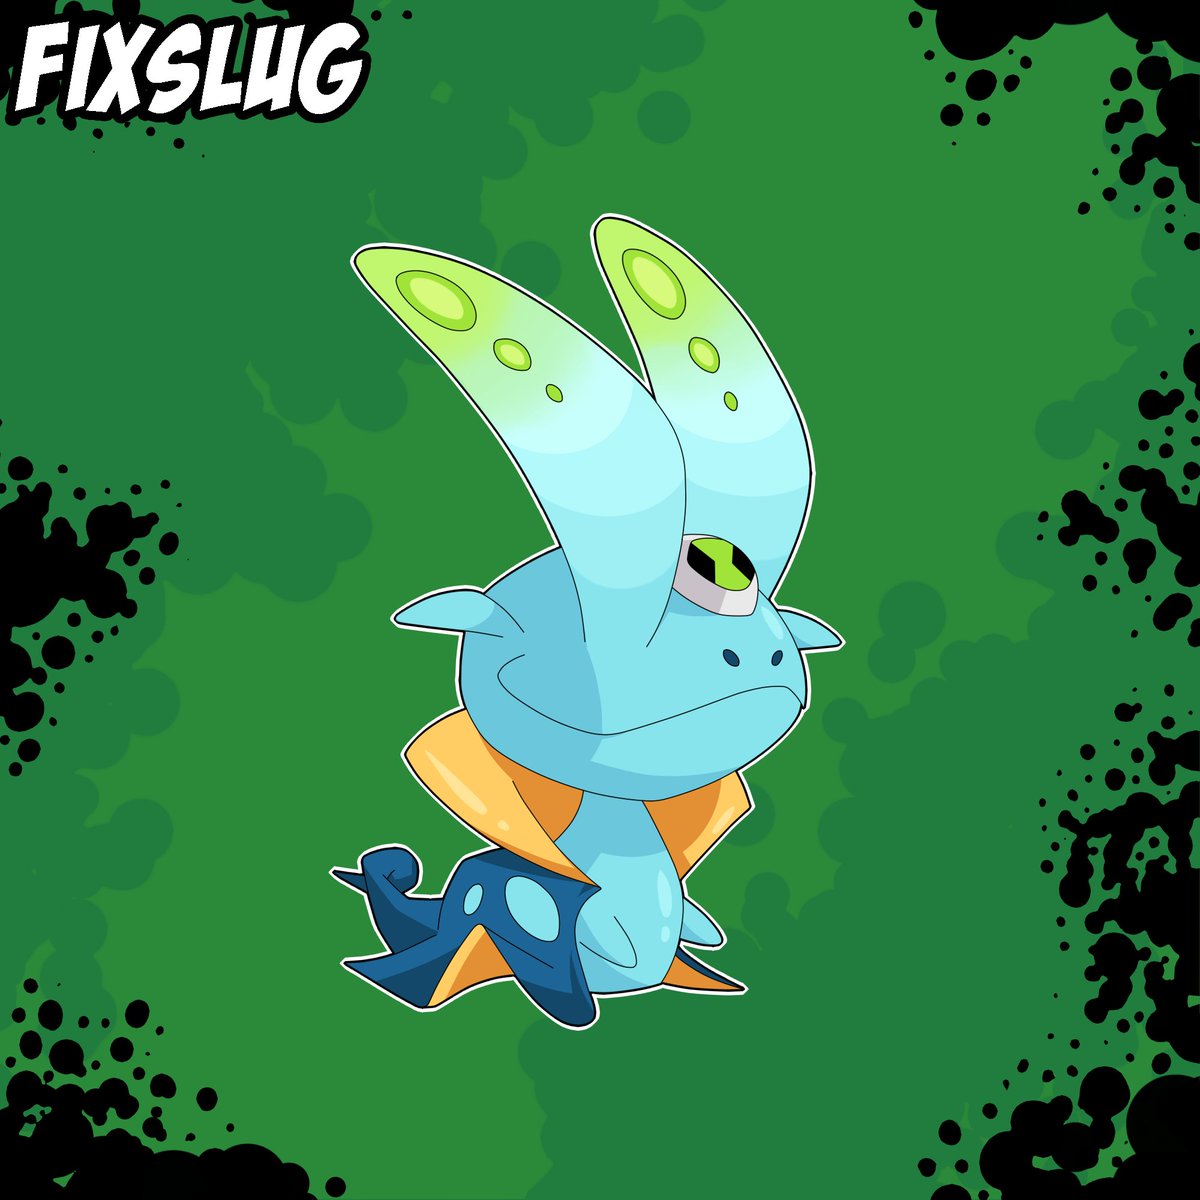 I NEED HEALING!! 🐌🩹 Fixslug is the DNA sample of a Therabranchian Therabranchians produce and shoot goo with special properties from their antennae. This goo can function as a potent glue or have healing properties when applied to living beings! #Ben10 #Ben10Art #Ben10fanart